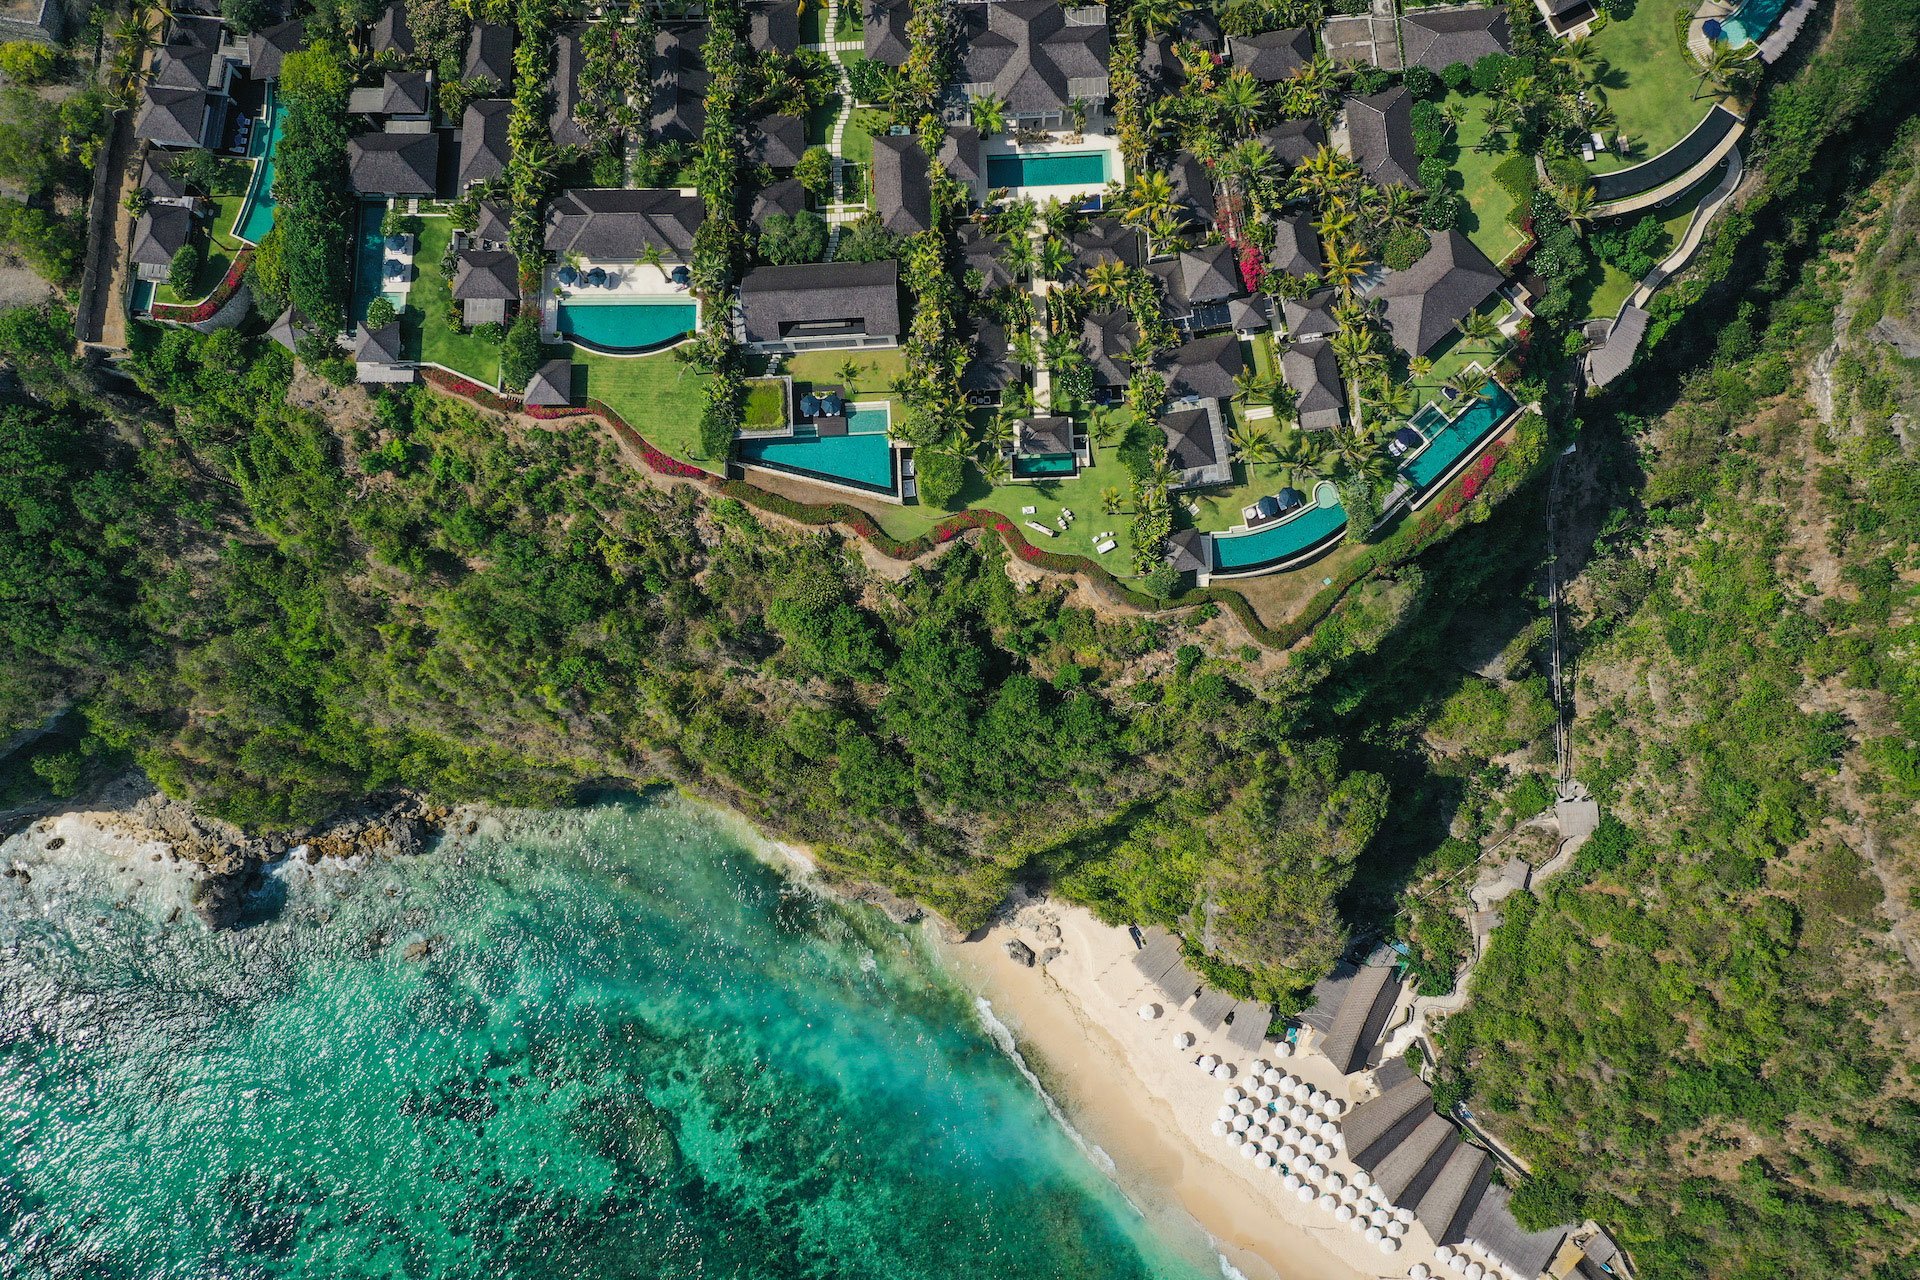 Overview of The Ungasan Clifftop Resort, Image from The Ungasan website